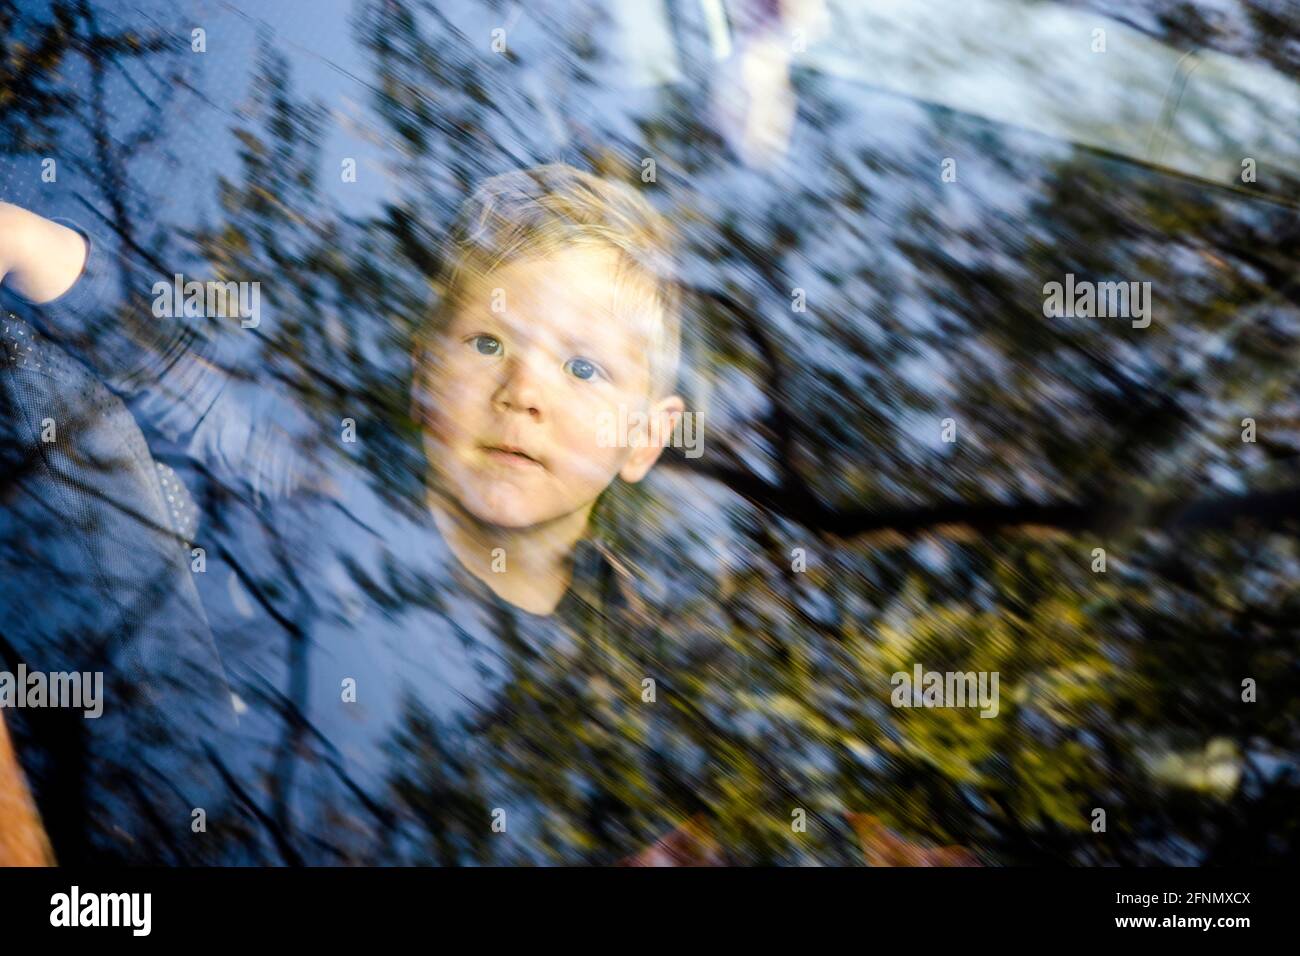 Dreamy portrait of small boy photographed through the window with tree reflection Stock Photo